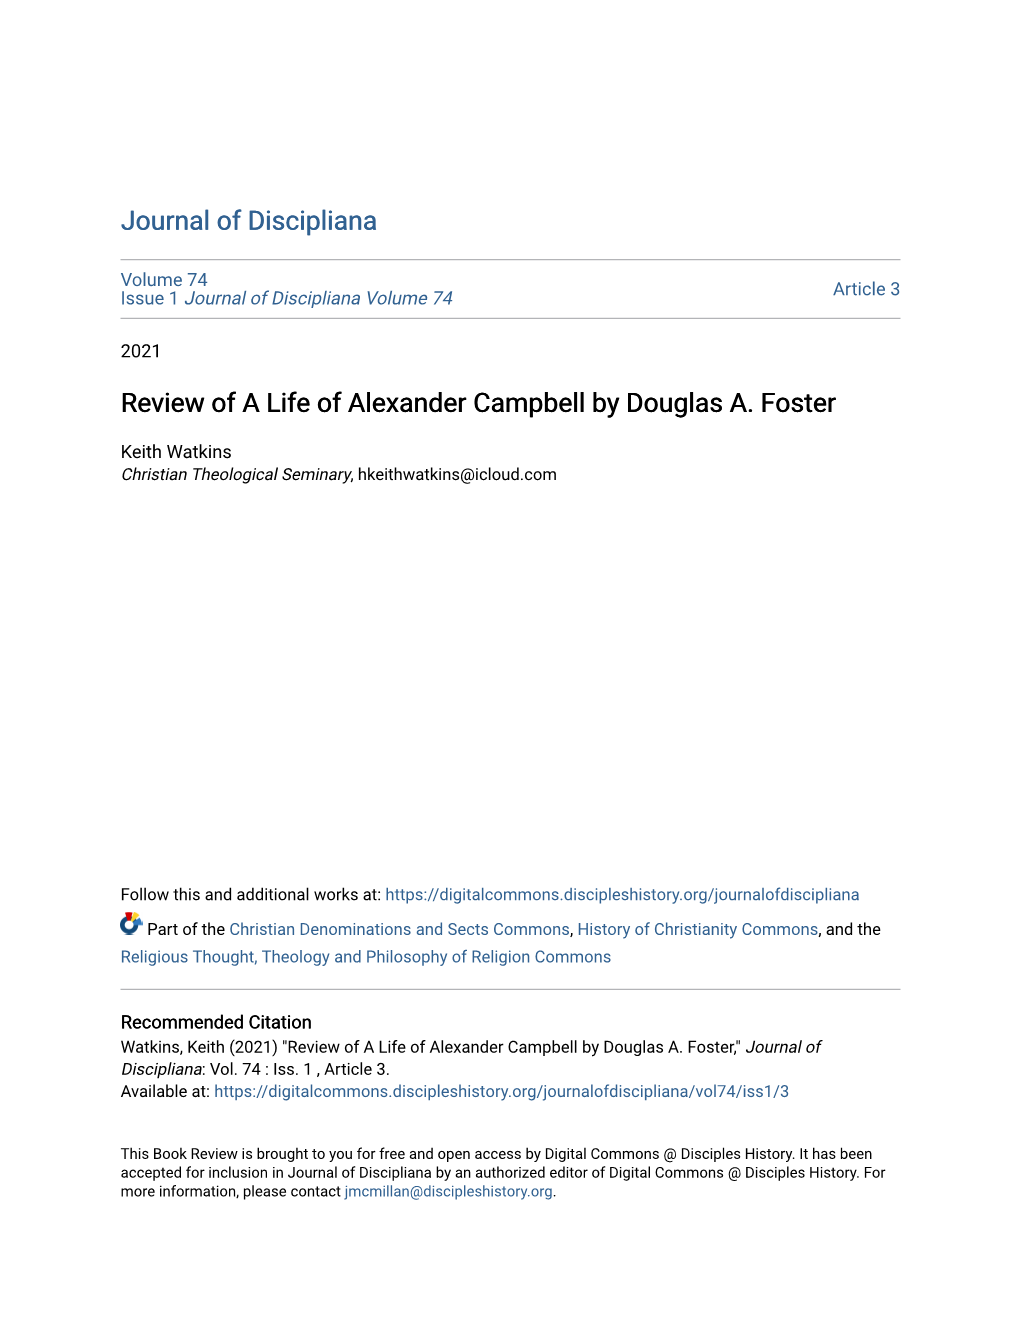 Review of a Life of Alexander Campbell by Douglas A. Foster